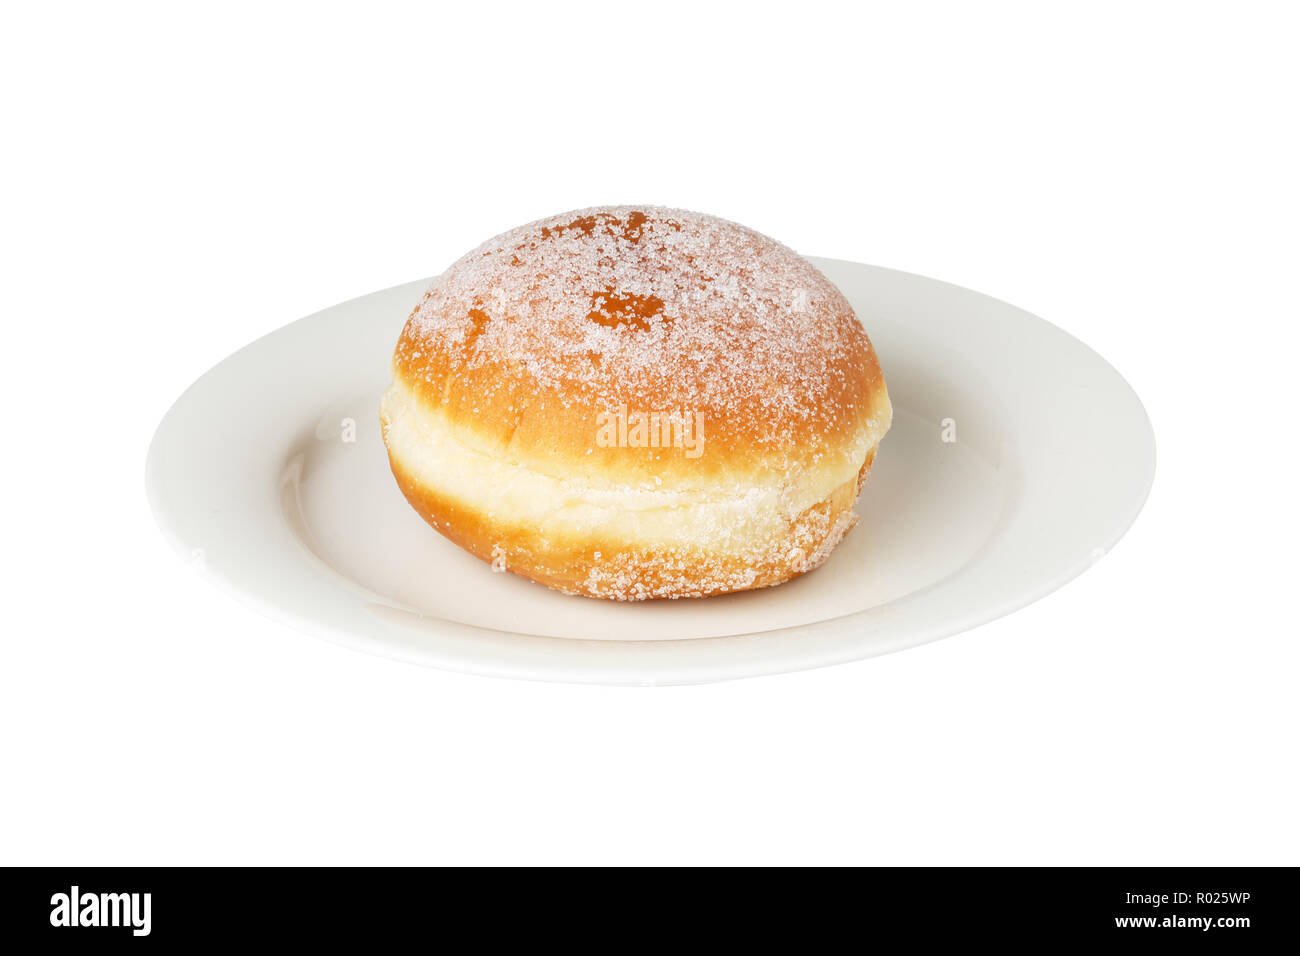 One vanlilla berliner donut on a plate isolated on white background. Stock Photo